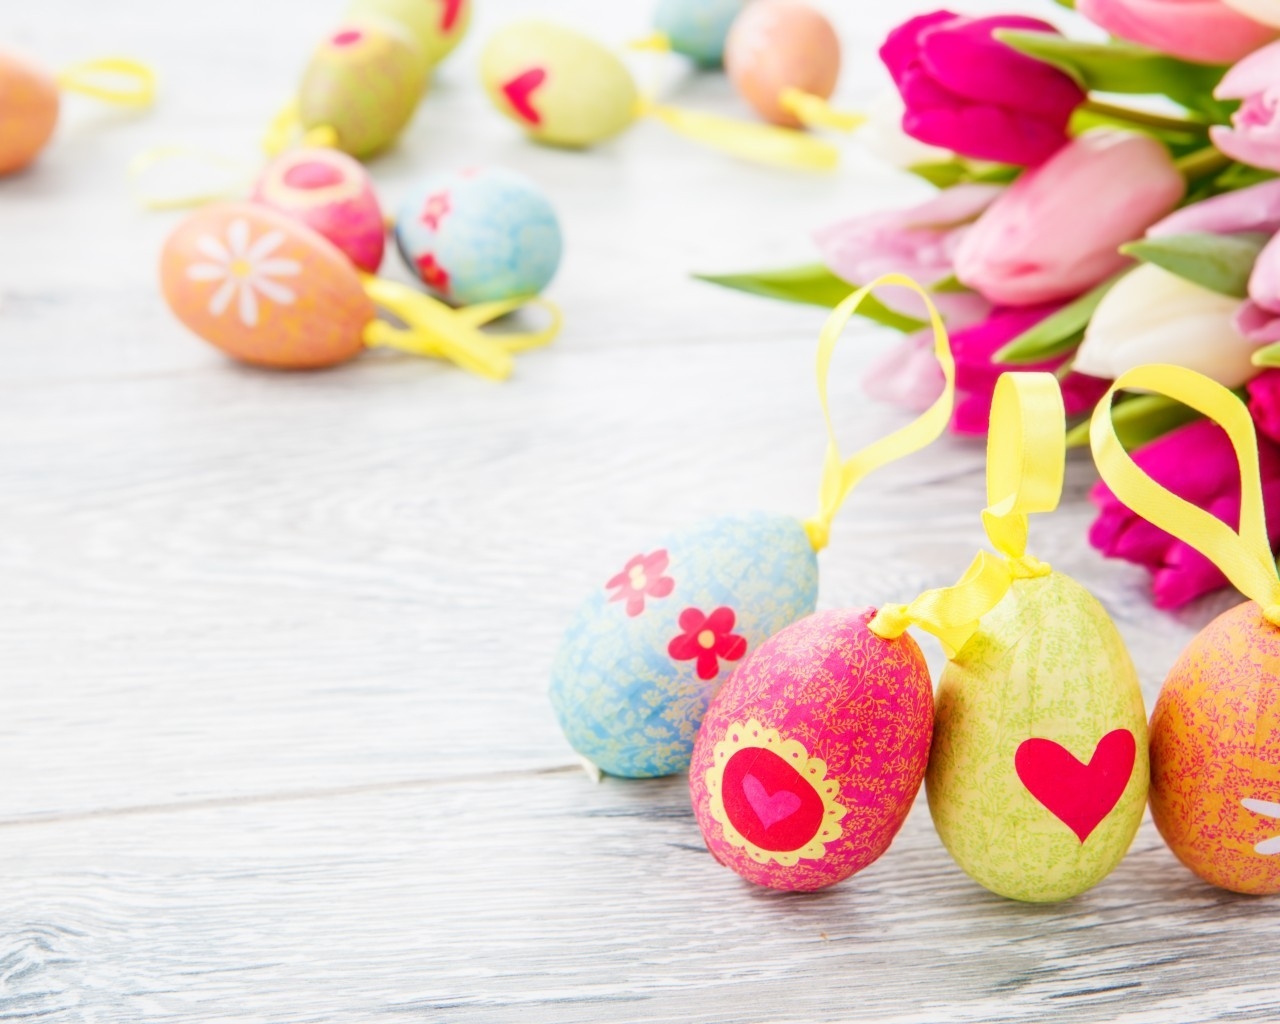 Decorative Easter Eggs for 1280 x 1024 resolution